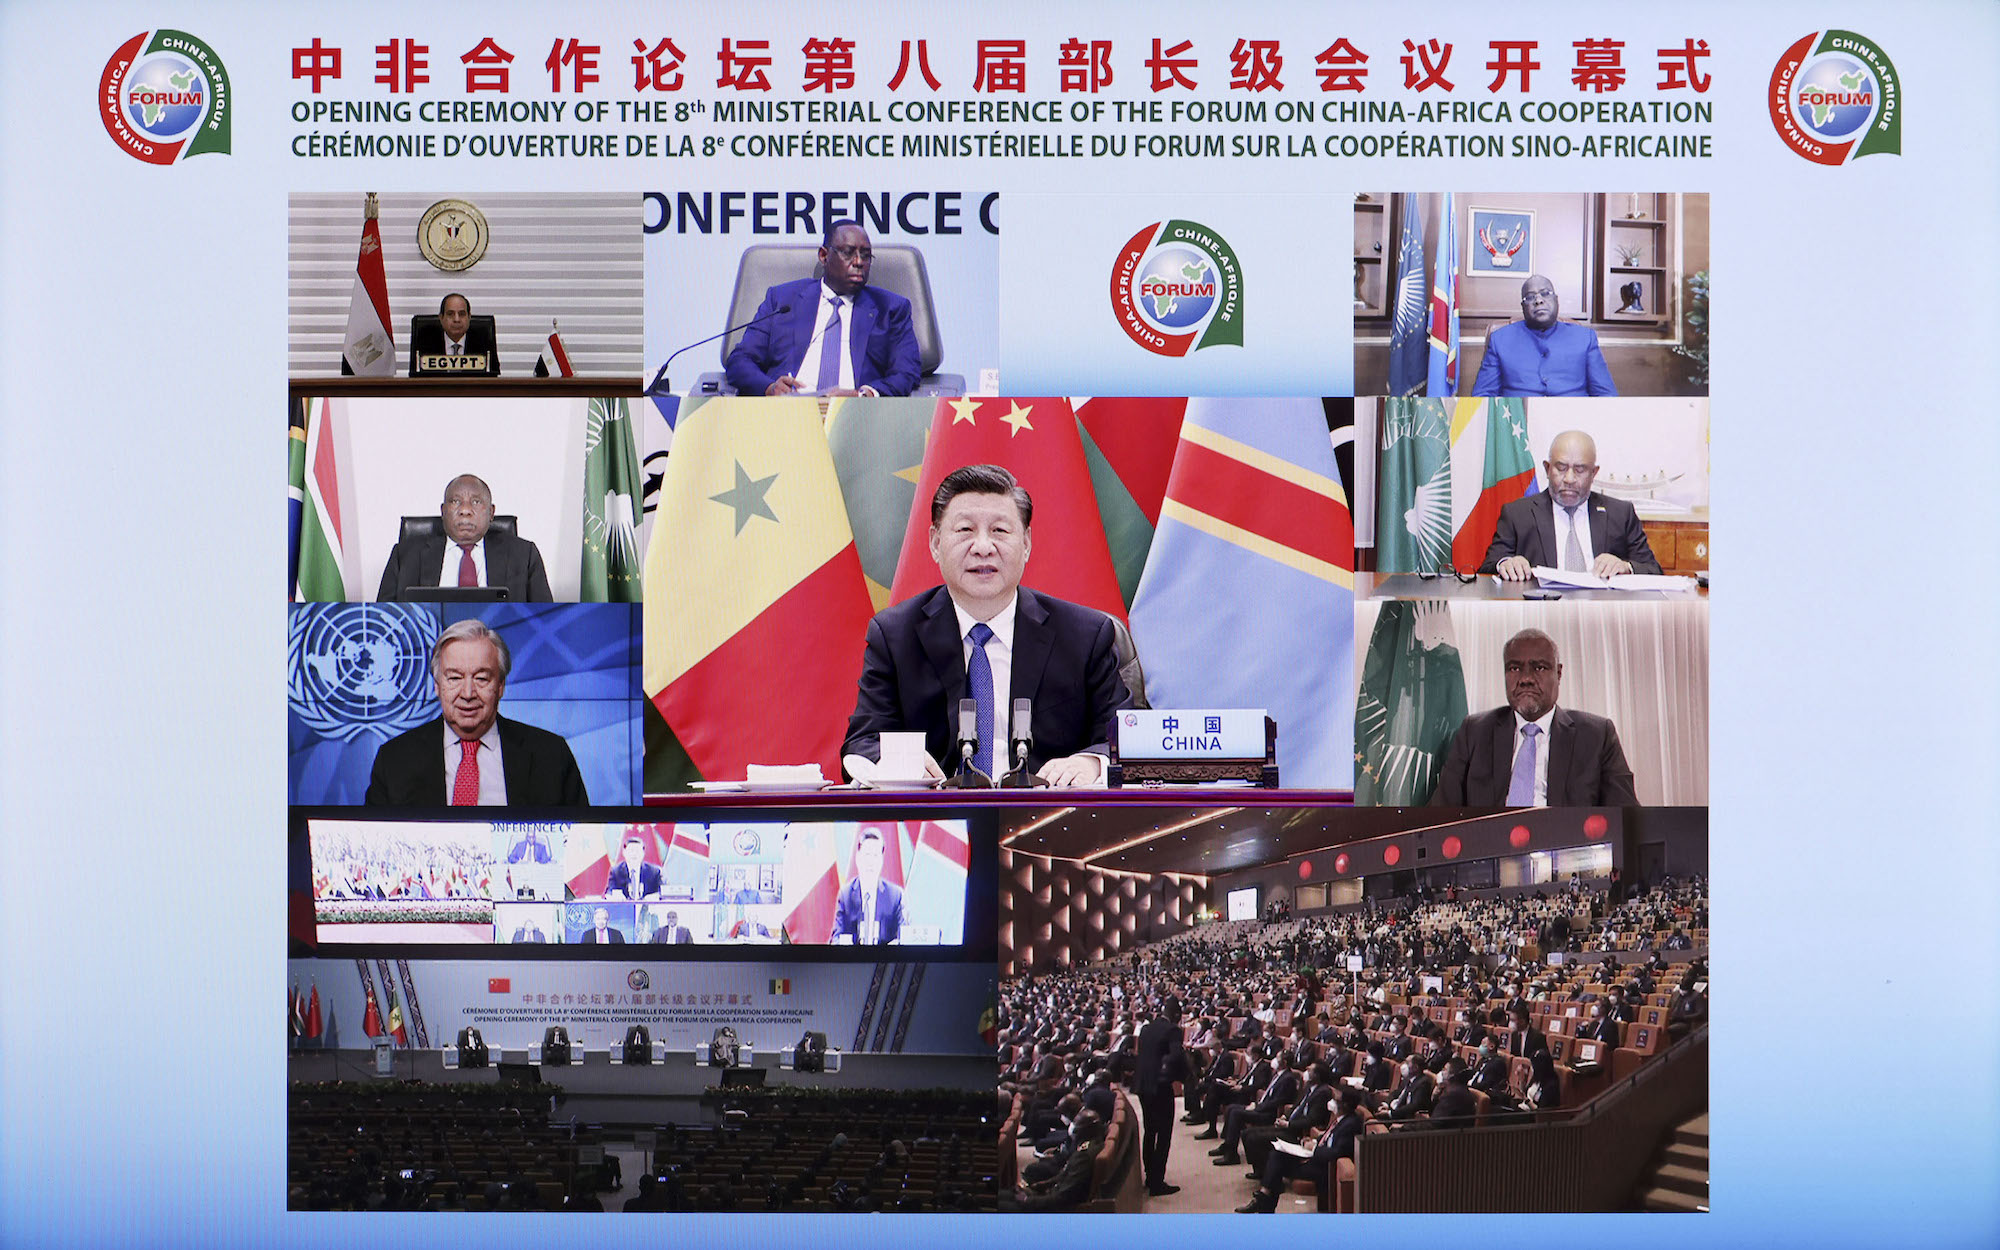 Eighth Ministerial Conference of the Forum on China-Africa Cooperation (FOCAC)